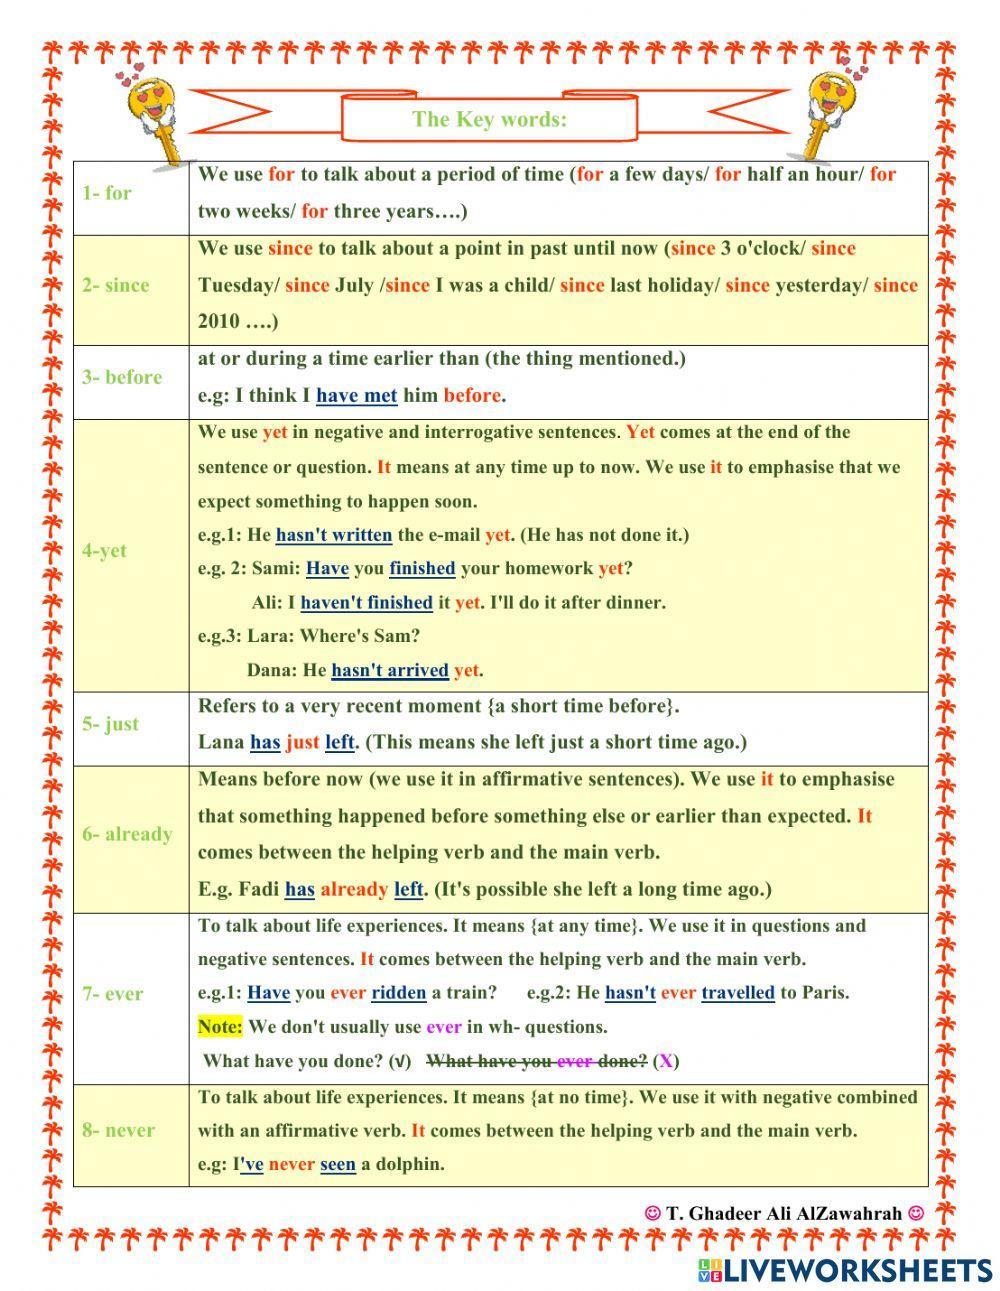 The Present Perfect Simple tense explanation and exercises